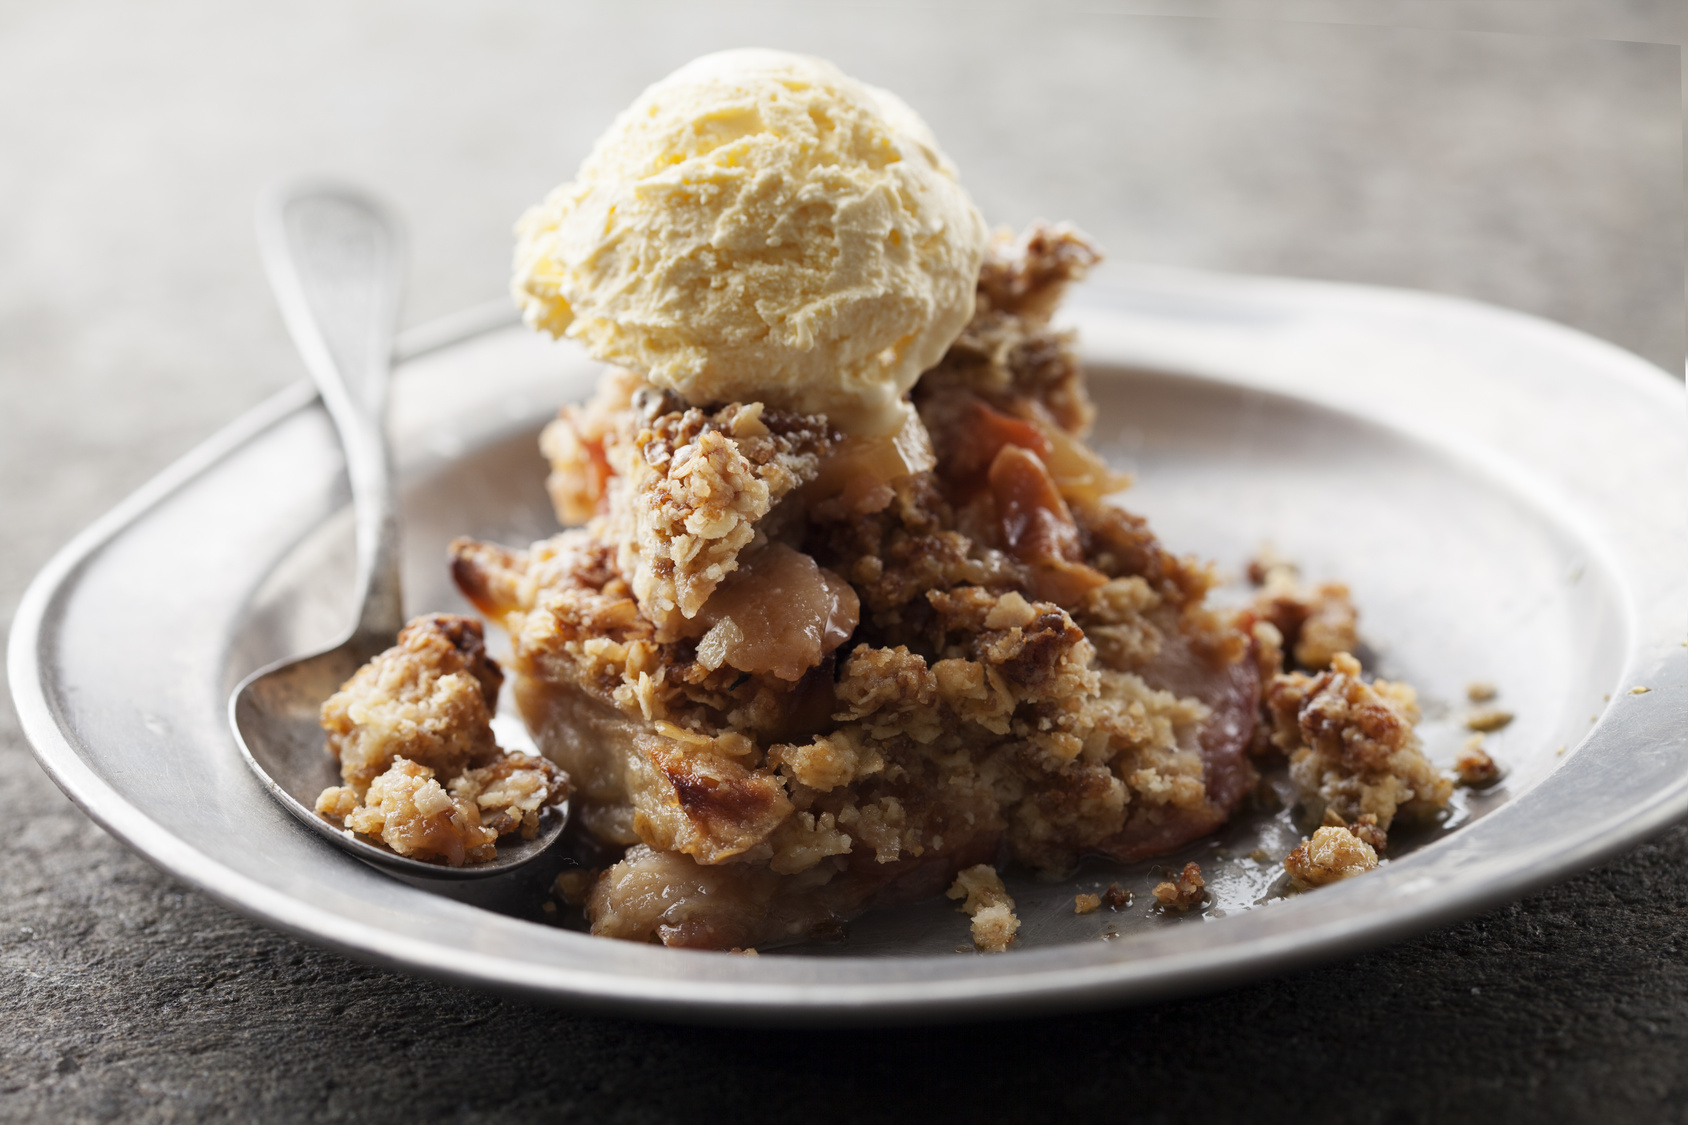 **Slow Cooker Apple Crumble